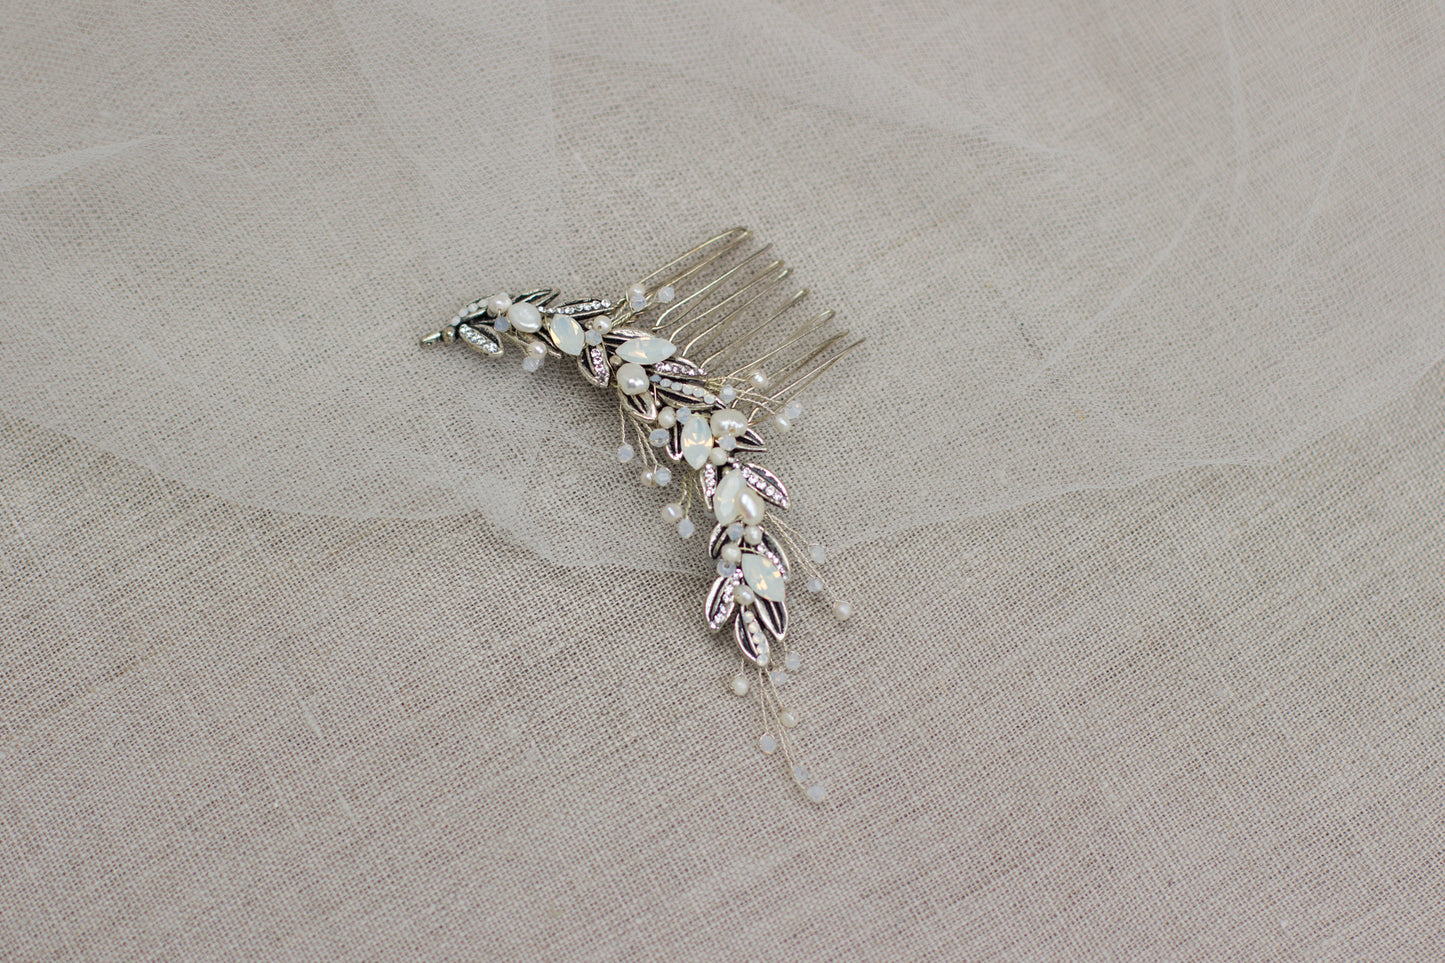 Shop for unique handmade bridal hair accessories in Europe's online wedding boutique. This one-of-a-kind crystal and leaf wedding headpiece, bridal hair comb will make a perfect addition to your wedding day look. White opal hair adornment.